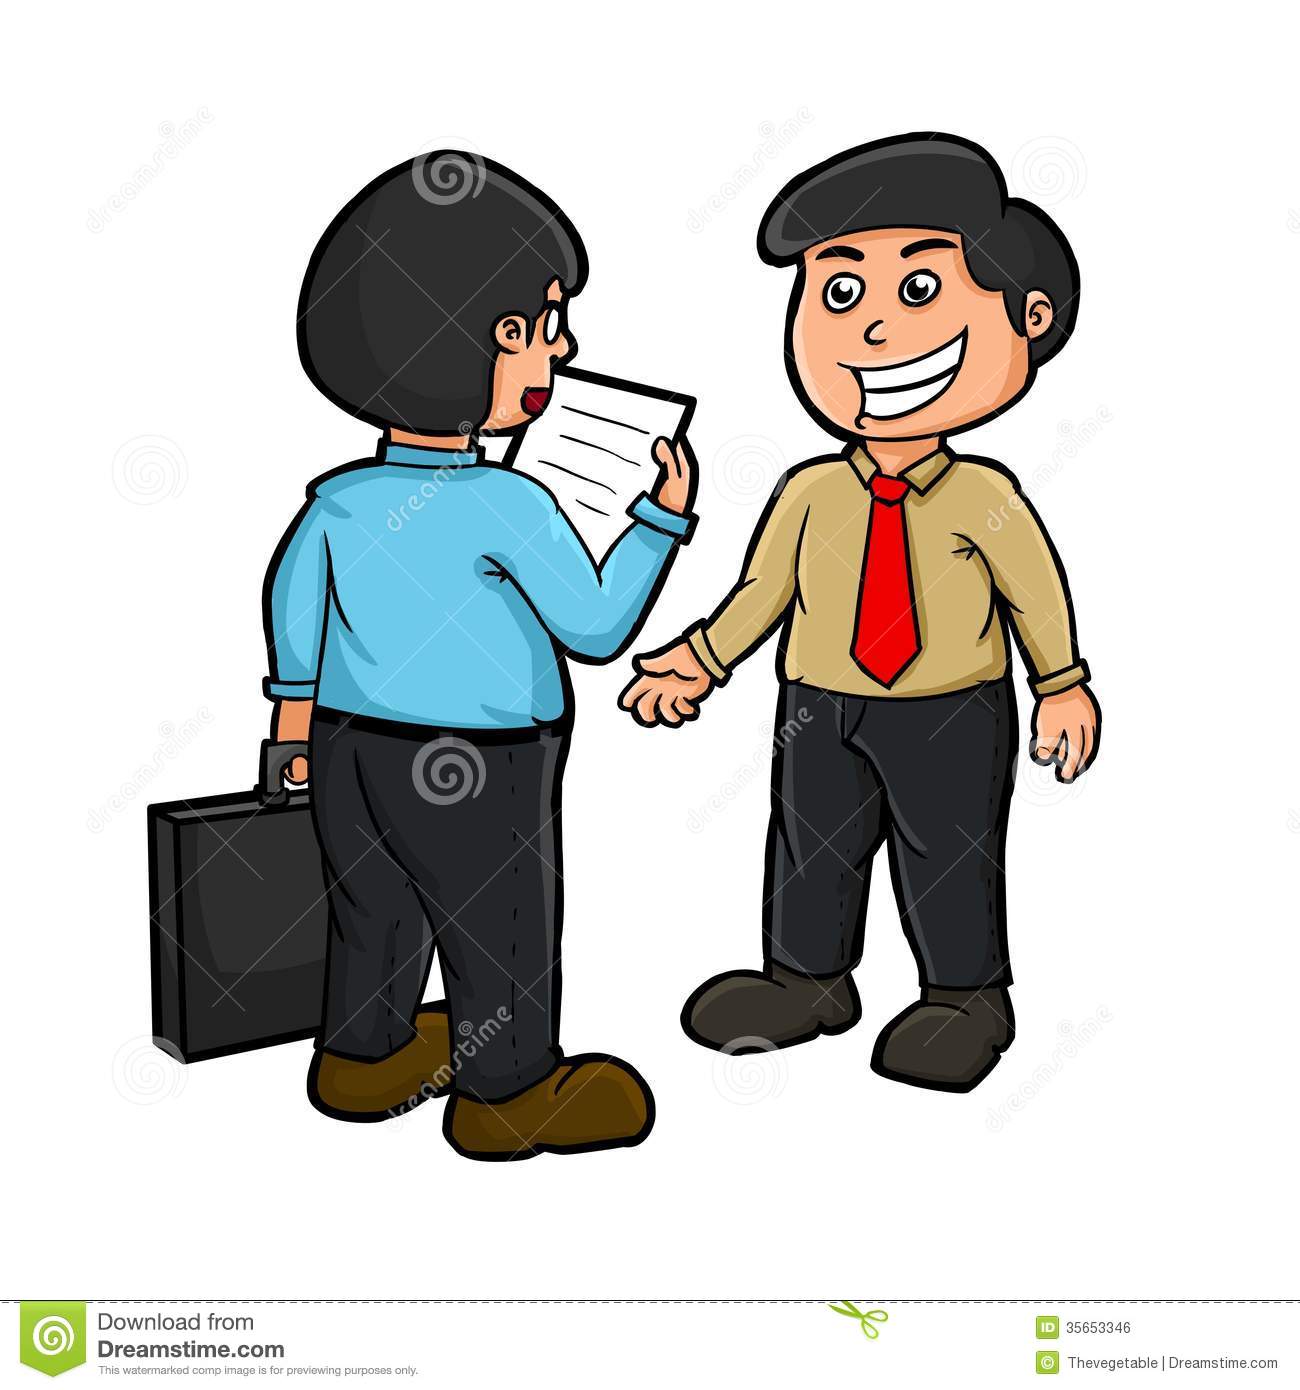 Meet With The Client Royalty Free Stock Image   Image  35653346